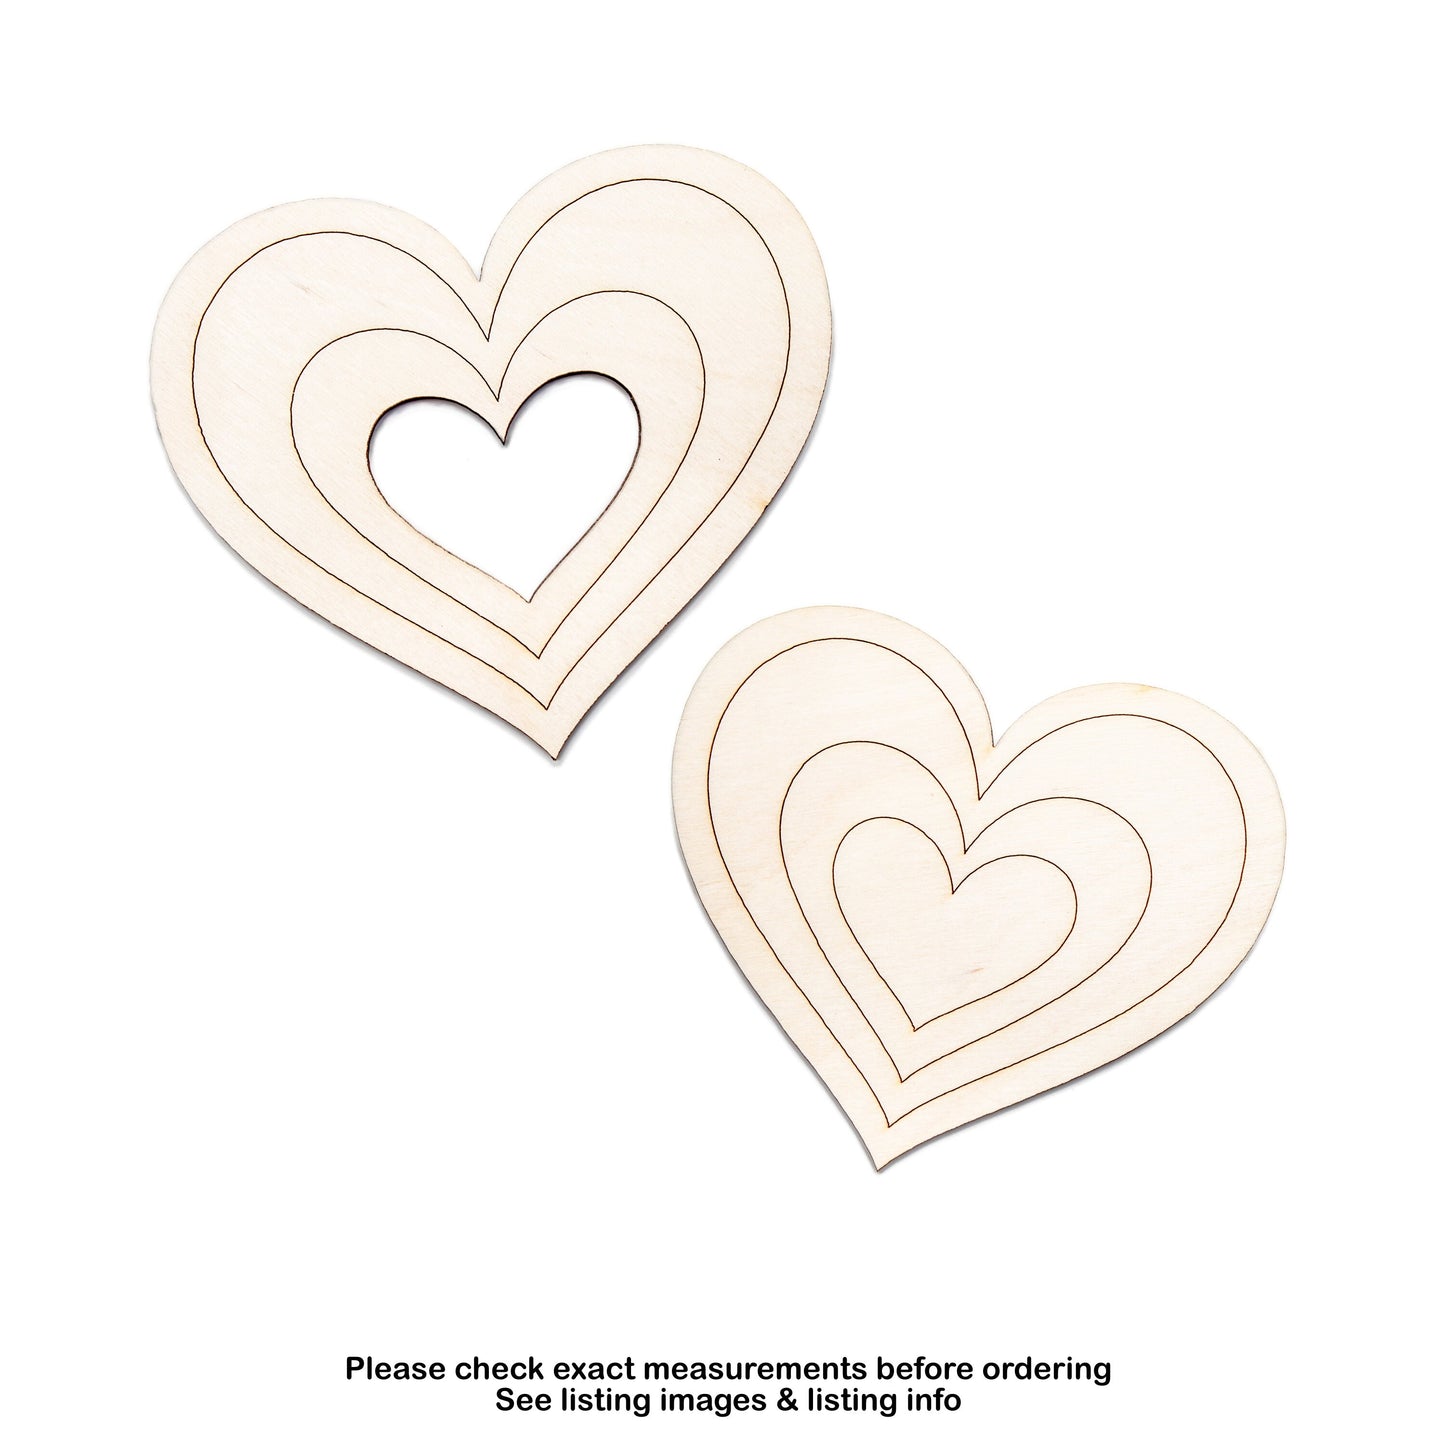 Ripple Heart-Lined Wood Cutout-Love Theme Decor-Two Design Options-Valentines Day Decor-Various Sizes-DIY Crafts-Paintable Crafts-Wood Heart